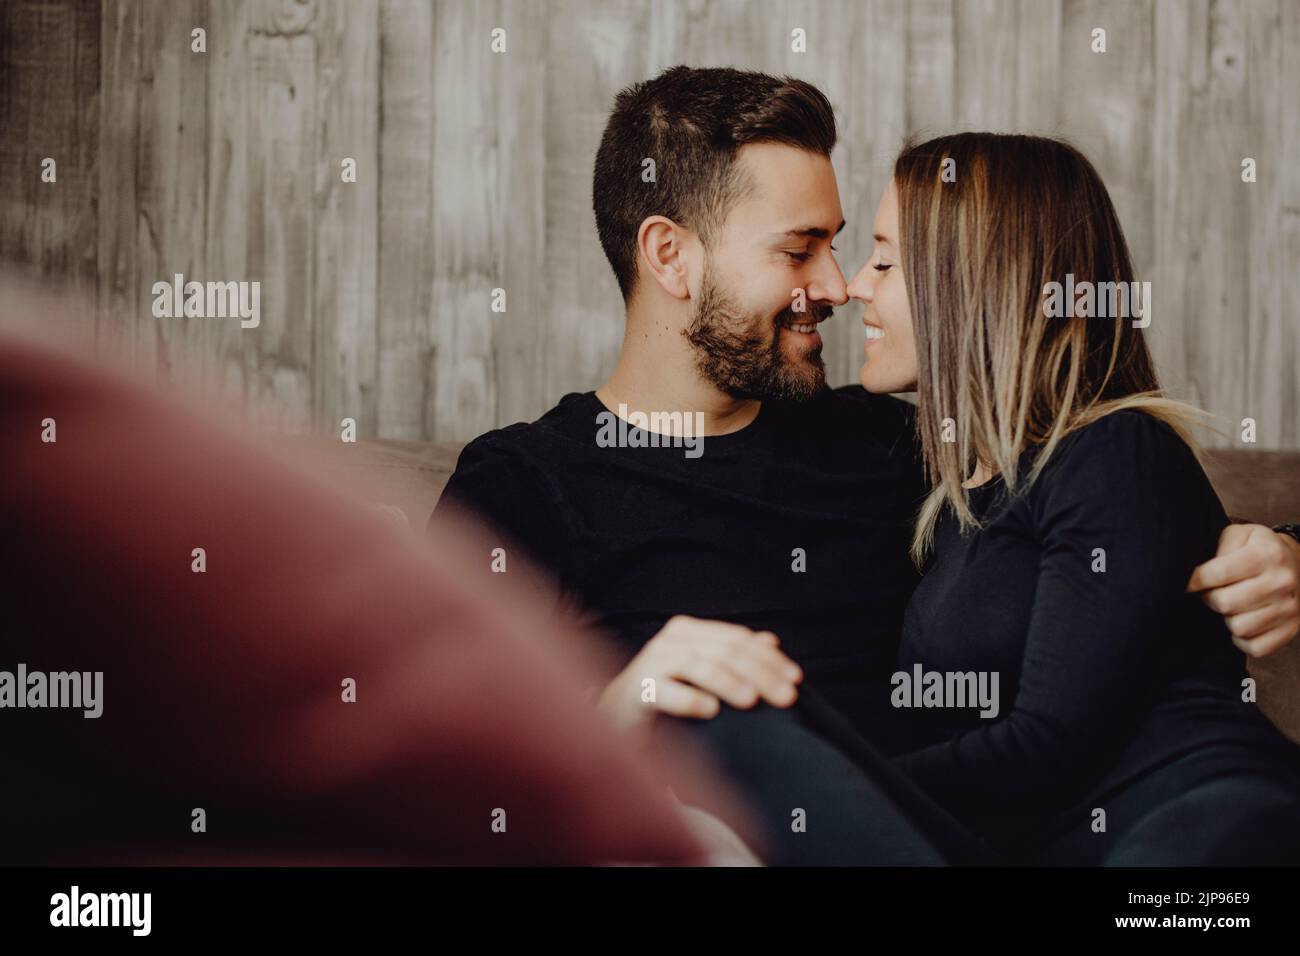 couple, bonding, looking at each other, pairs Stock Photo